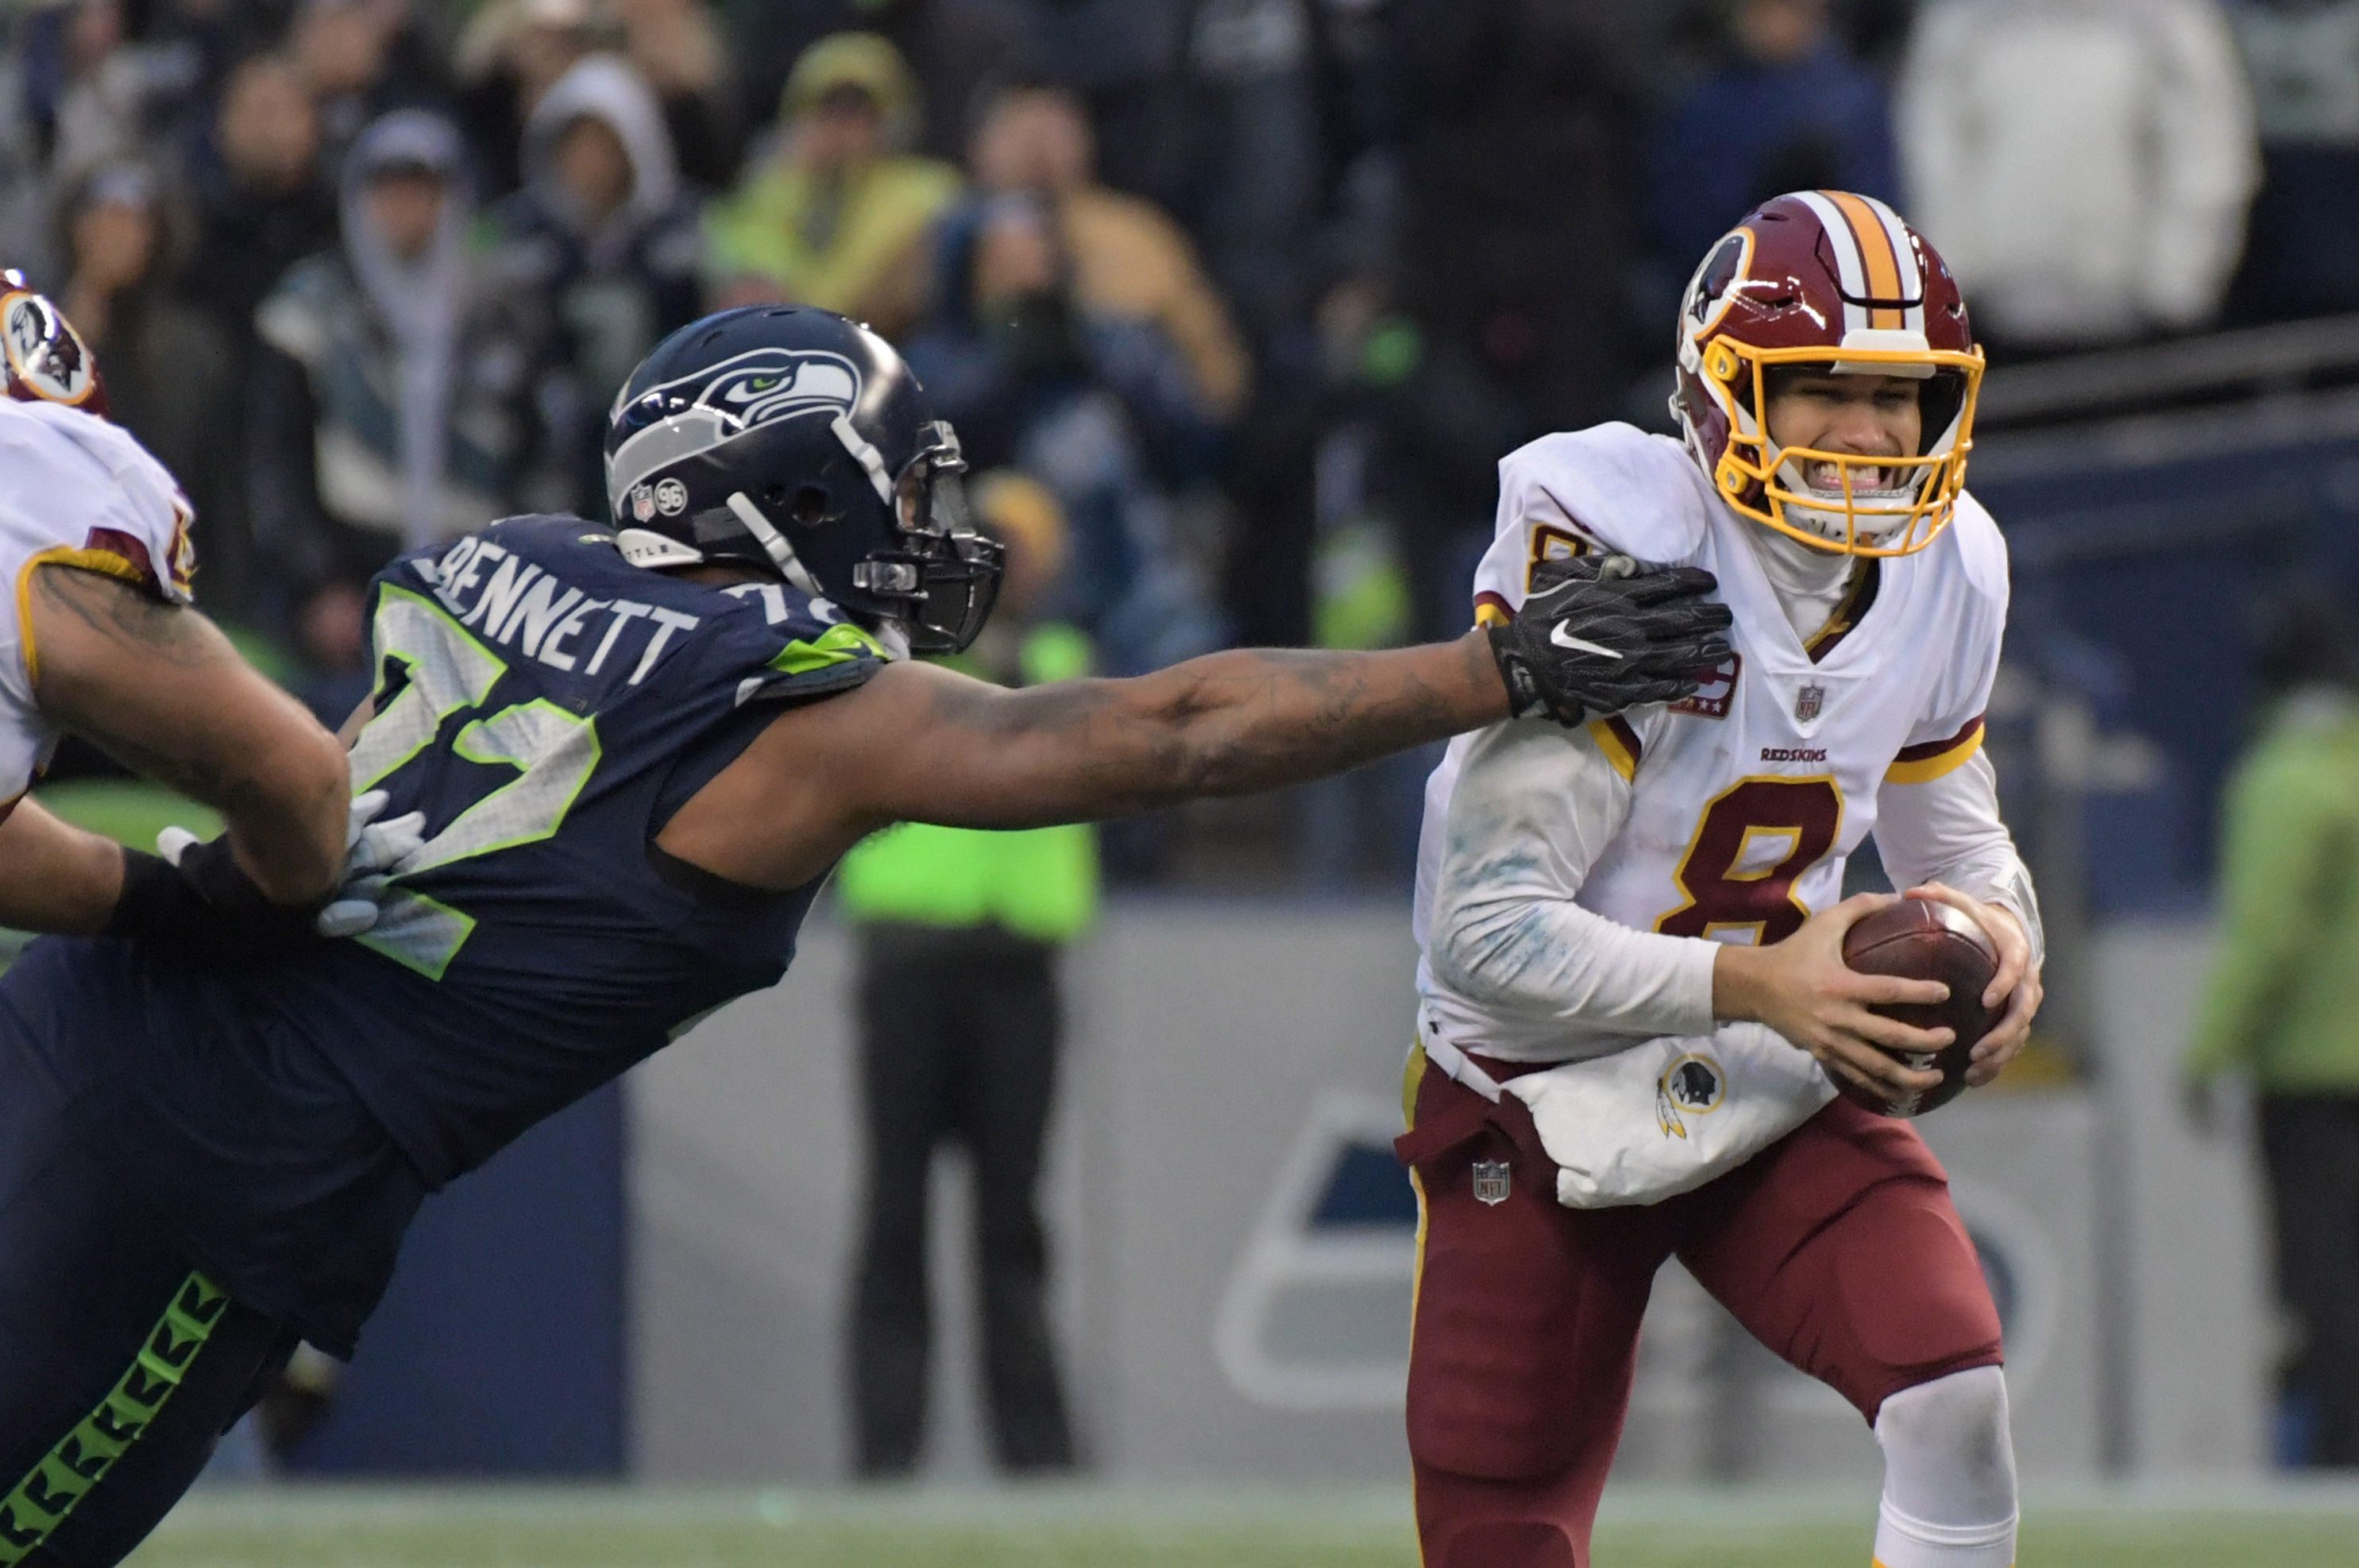 What Does Michael Bennett Bring to the Eagles Besides a Concerning Lack of Shoulder Pads?